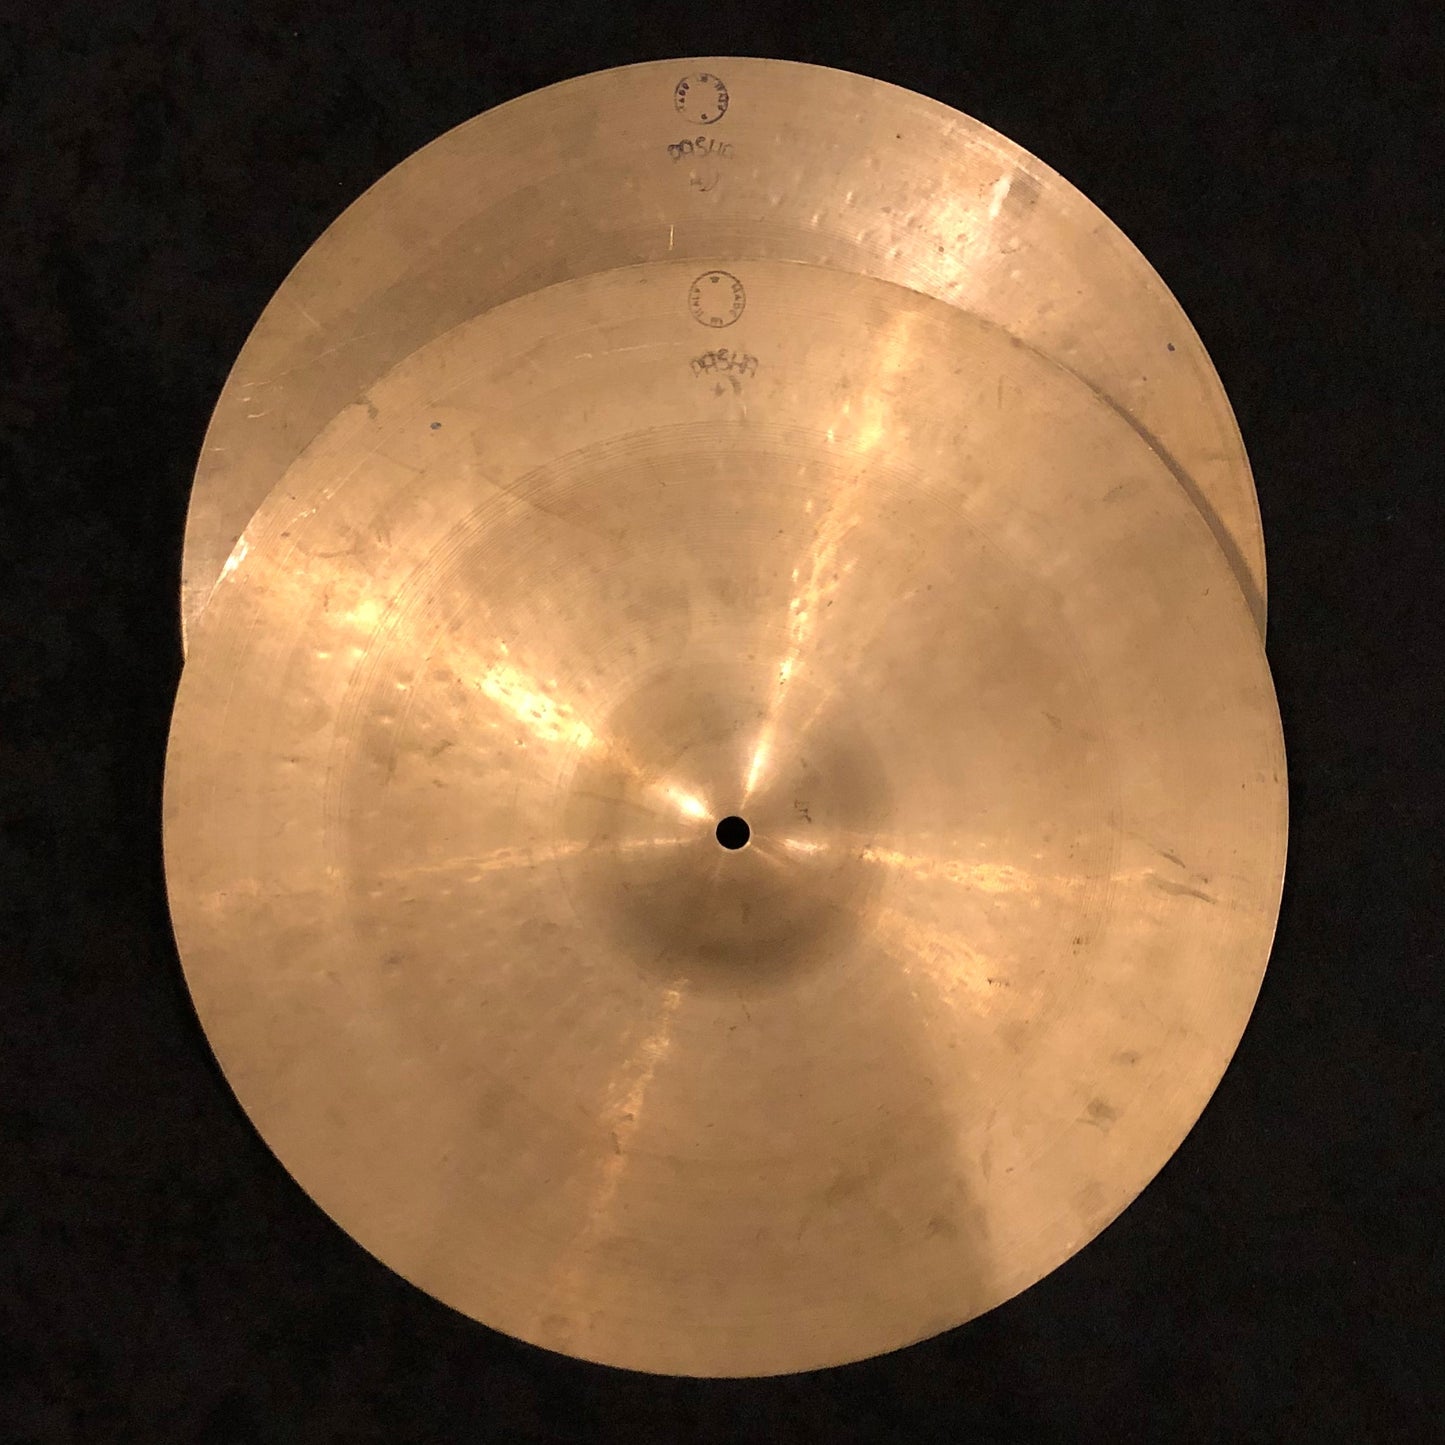 14" Pasha UFIP 1950s/60s Hi-Hat Cymbal Pair Paper Thin Rogers 568g/600g #714